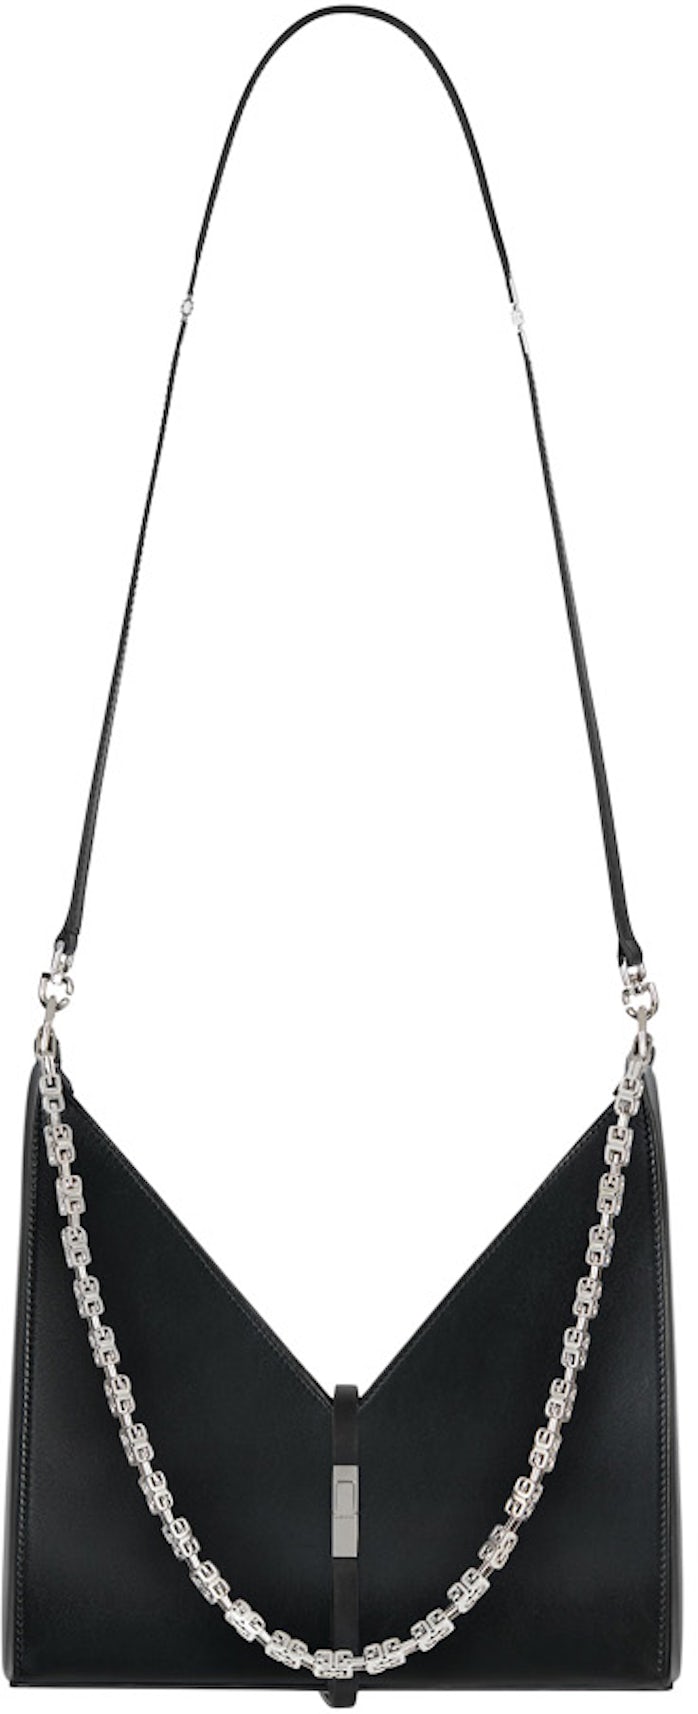 Givenchy Small Cut Out Bag In Box Leather With Chain Black in Calfskin ...